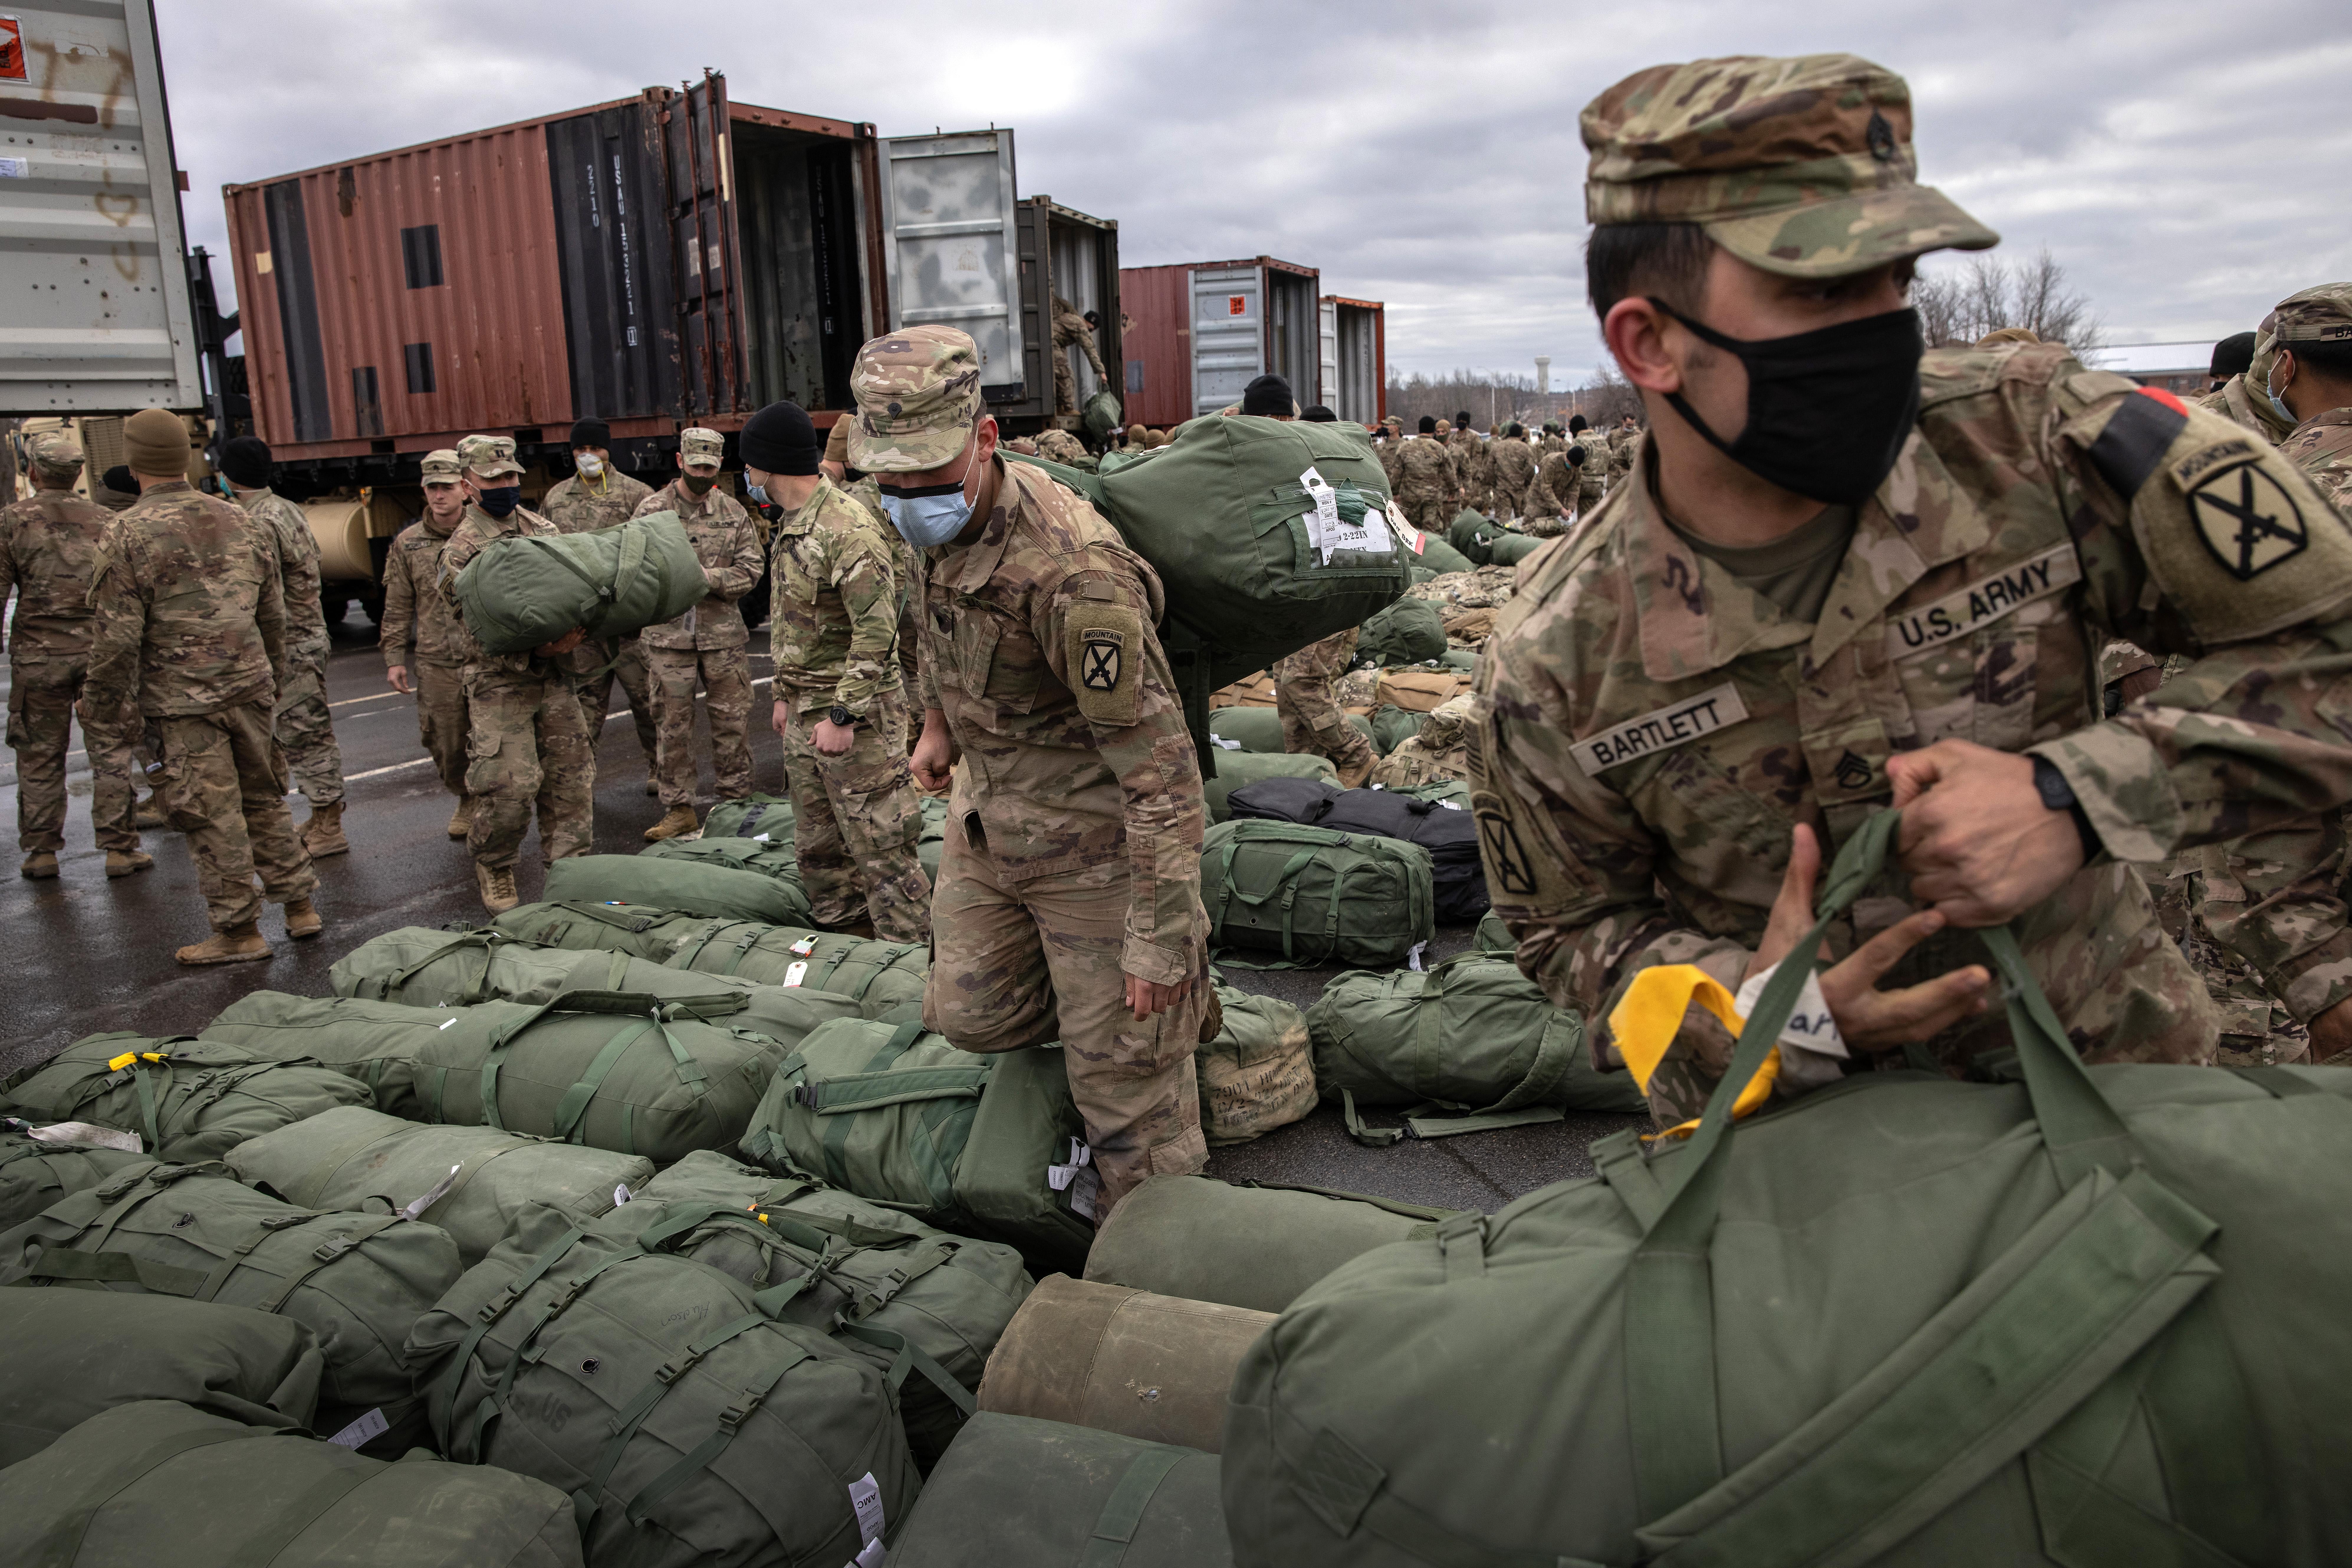 Soldiers in fatigues pick up their duffel bags, which are arranged in neat rows on the ground. There are shipping containers in the background.